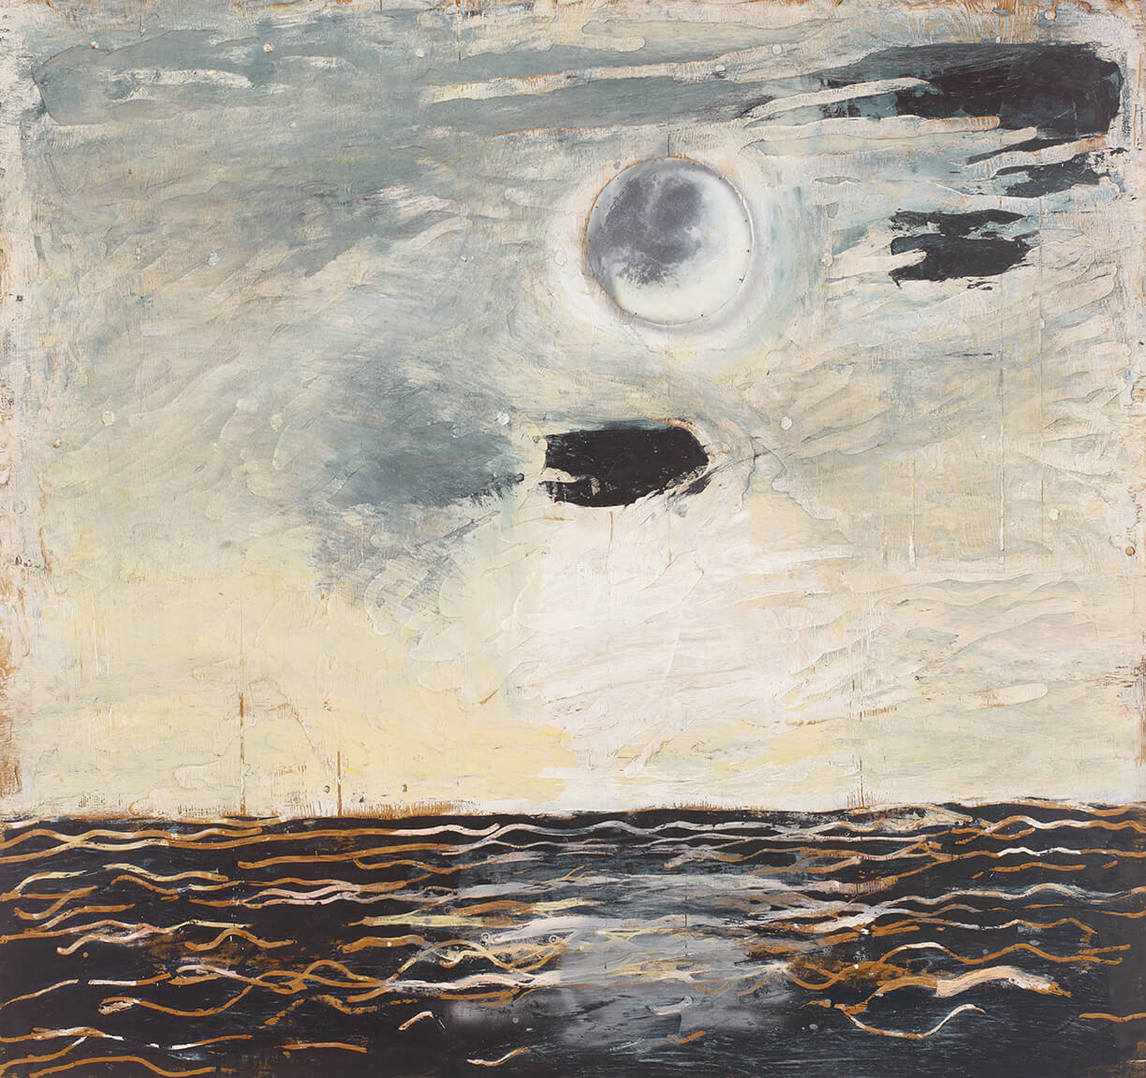 Paterson Ewen, Moon over Water, 1977